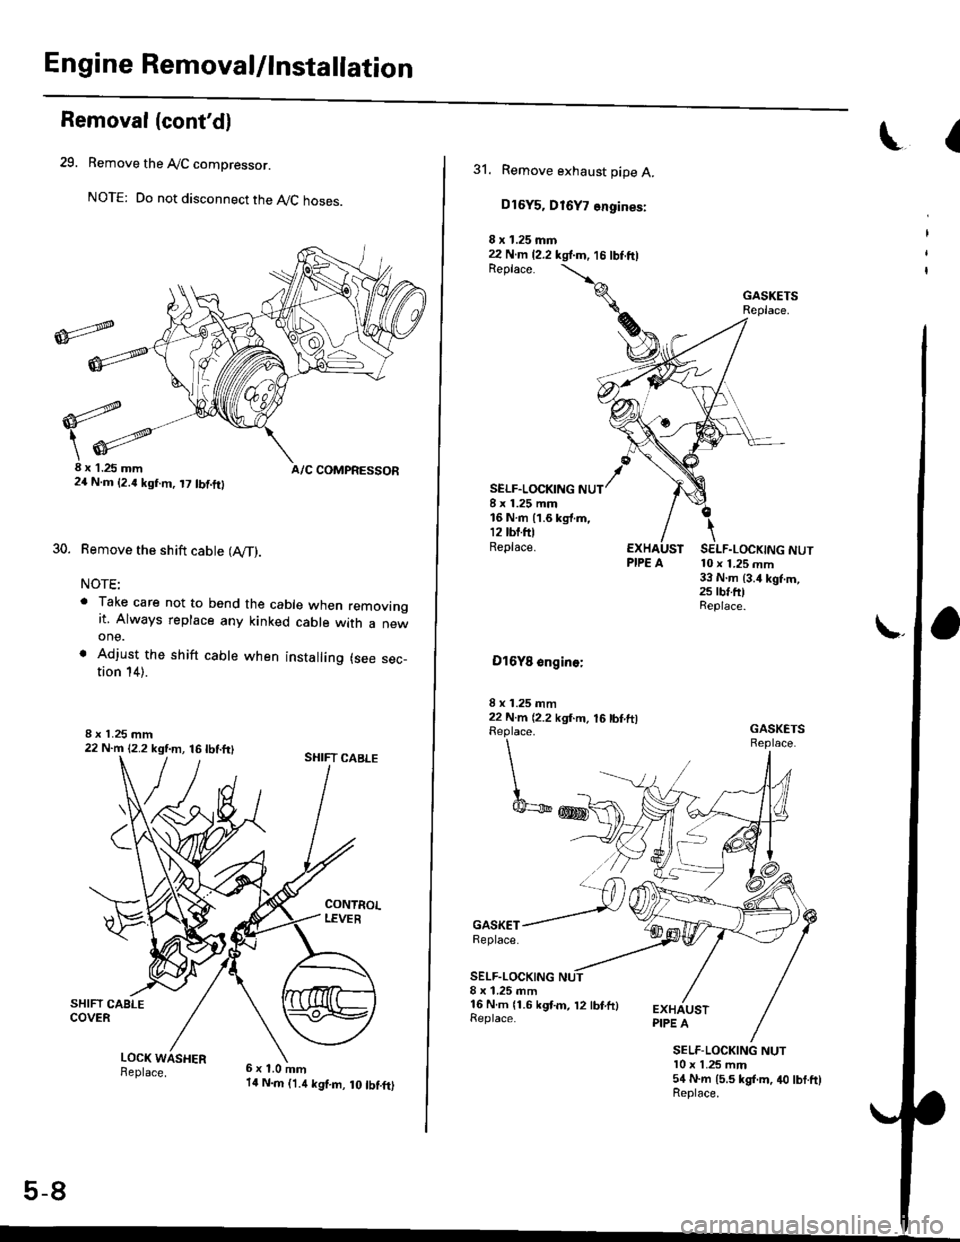 HONDA CIVIC 1999 6.G Workshop Manual Engine Removal/lnstallation
Removal(contdl
29. Remove the AyC compressor.
NOTE: Do not disconnect the AyC hoses.
30.
8x 1.25 mm A/C COMPRESSOR24 N.m (2.{ kgf.m, t7 tbtft}
Remove the shift cable (IV